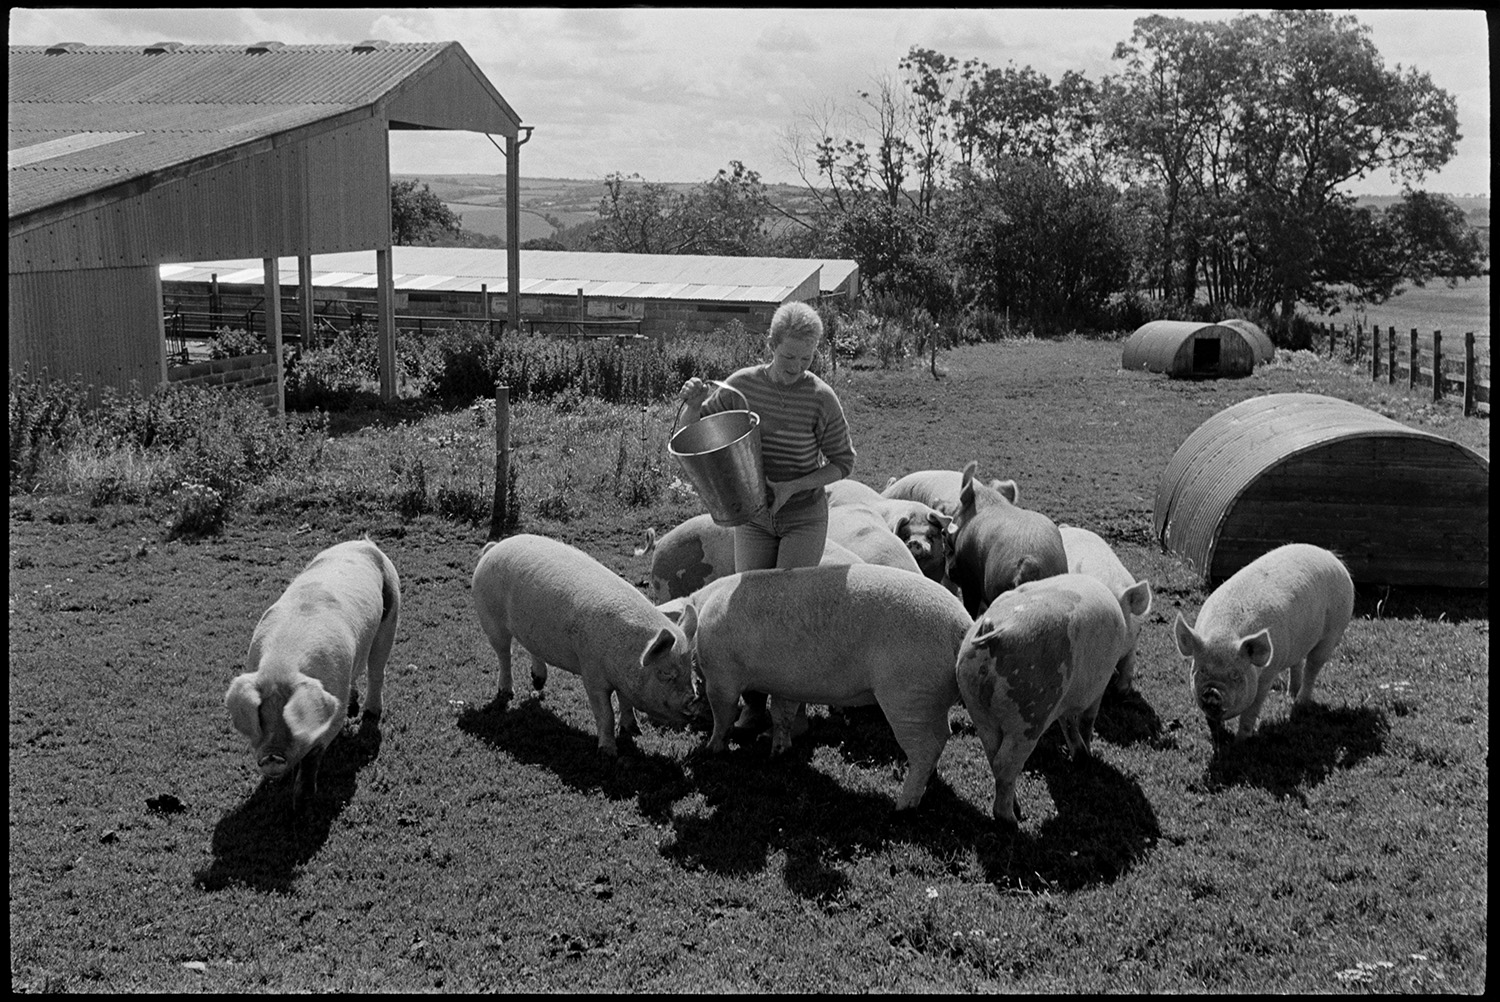 Woman farmer and pigs. 
[Anne Petch feeding pigs in a field at Heal Farm, Kings Nympton. Corrugated iron arced pig stys and barns can be seen in the background.]